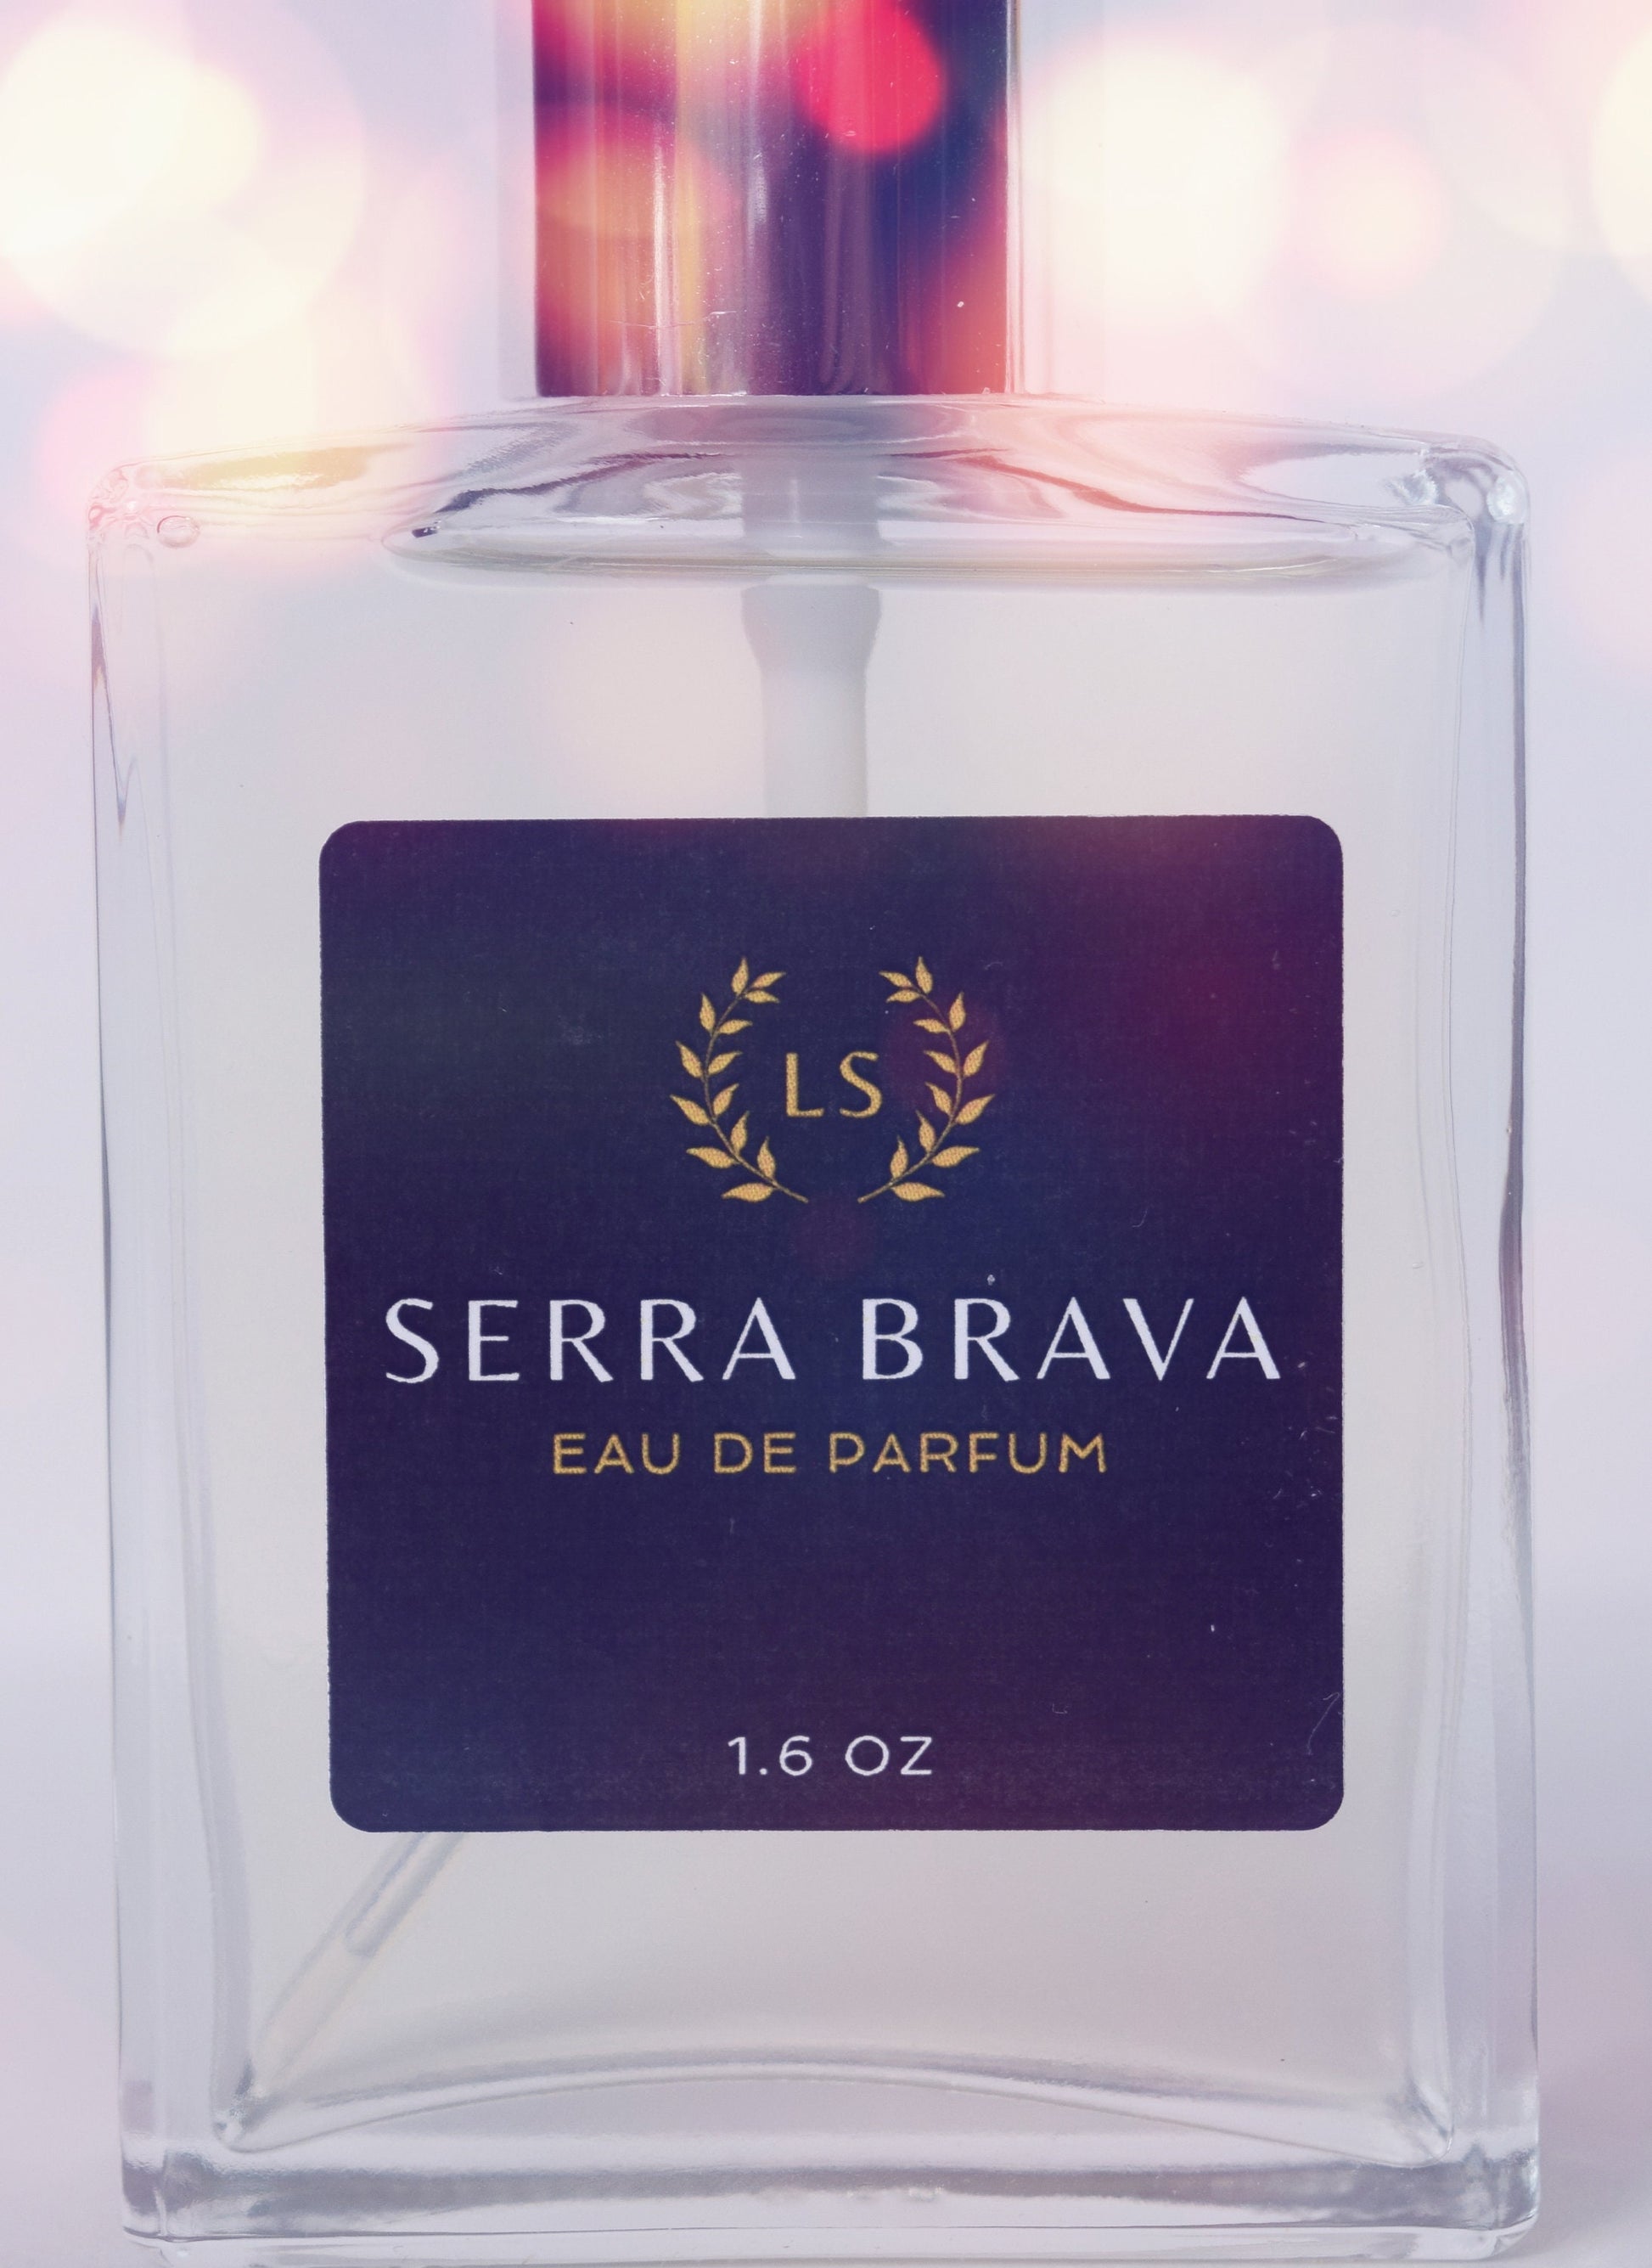 Bravo Sierra Eau de Cologne for Men, Citrus & Cedarwood Scent - 3.4 fl oz - Bold New Take on A Classic Musk - Made in The USA - Men's Perfume 